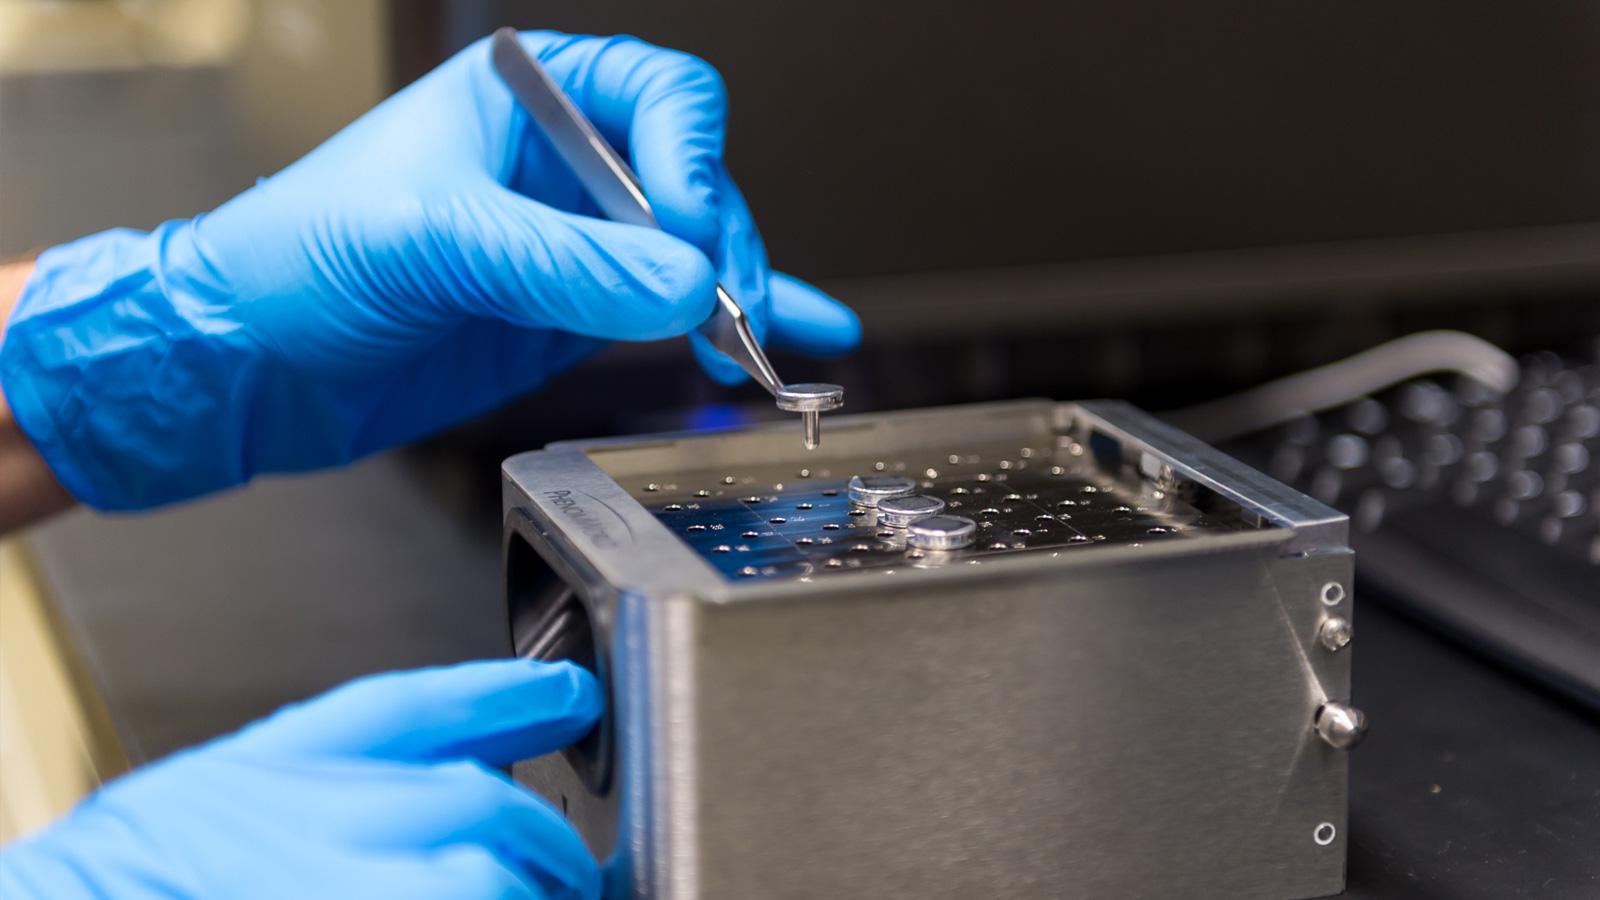 The Manufacturing Engineering Research Facility at Argonne will be used to prepare samples of battery materials for testing and characterization. (Image by Argonne National Laboratory.)